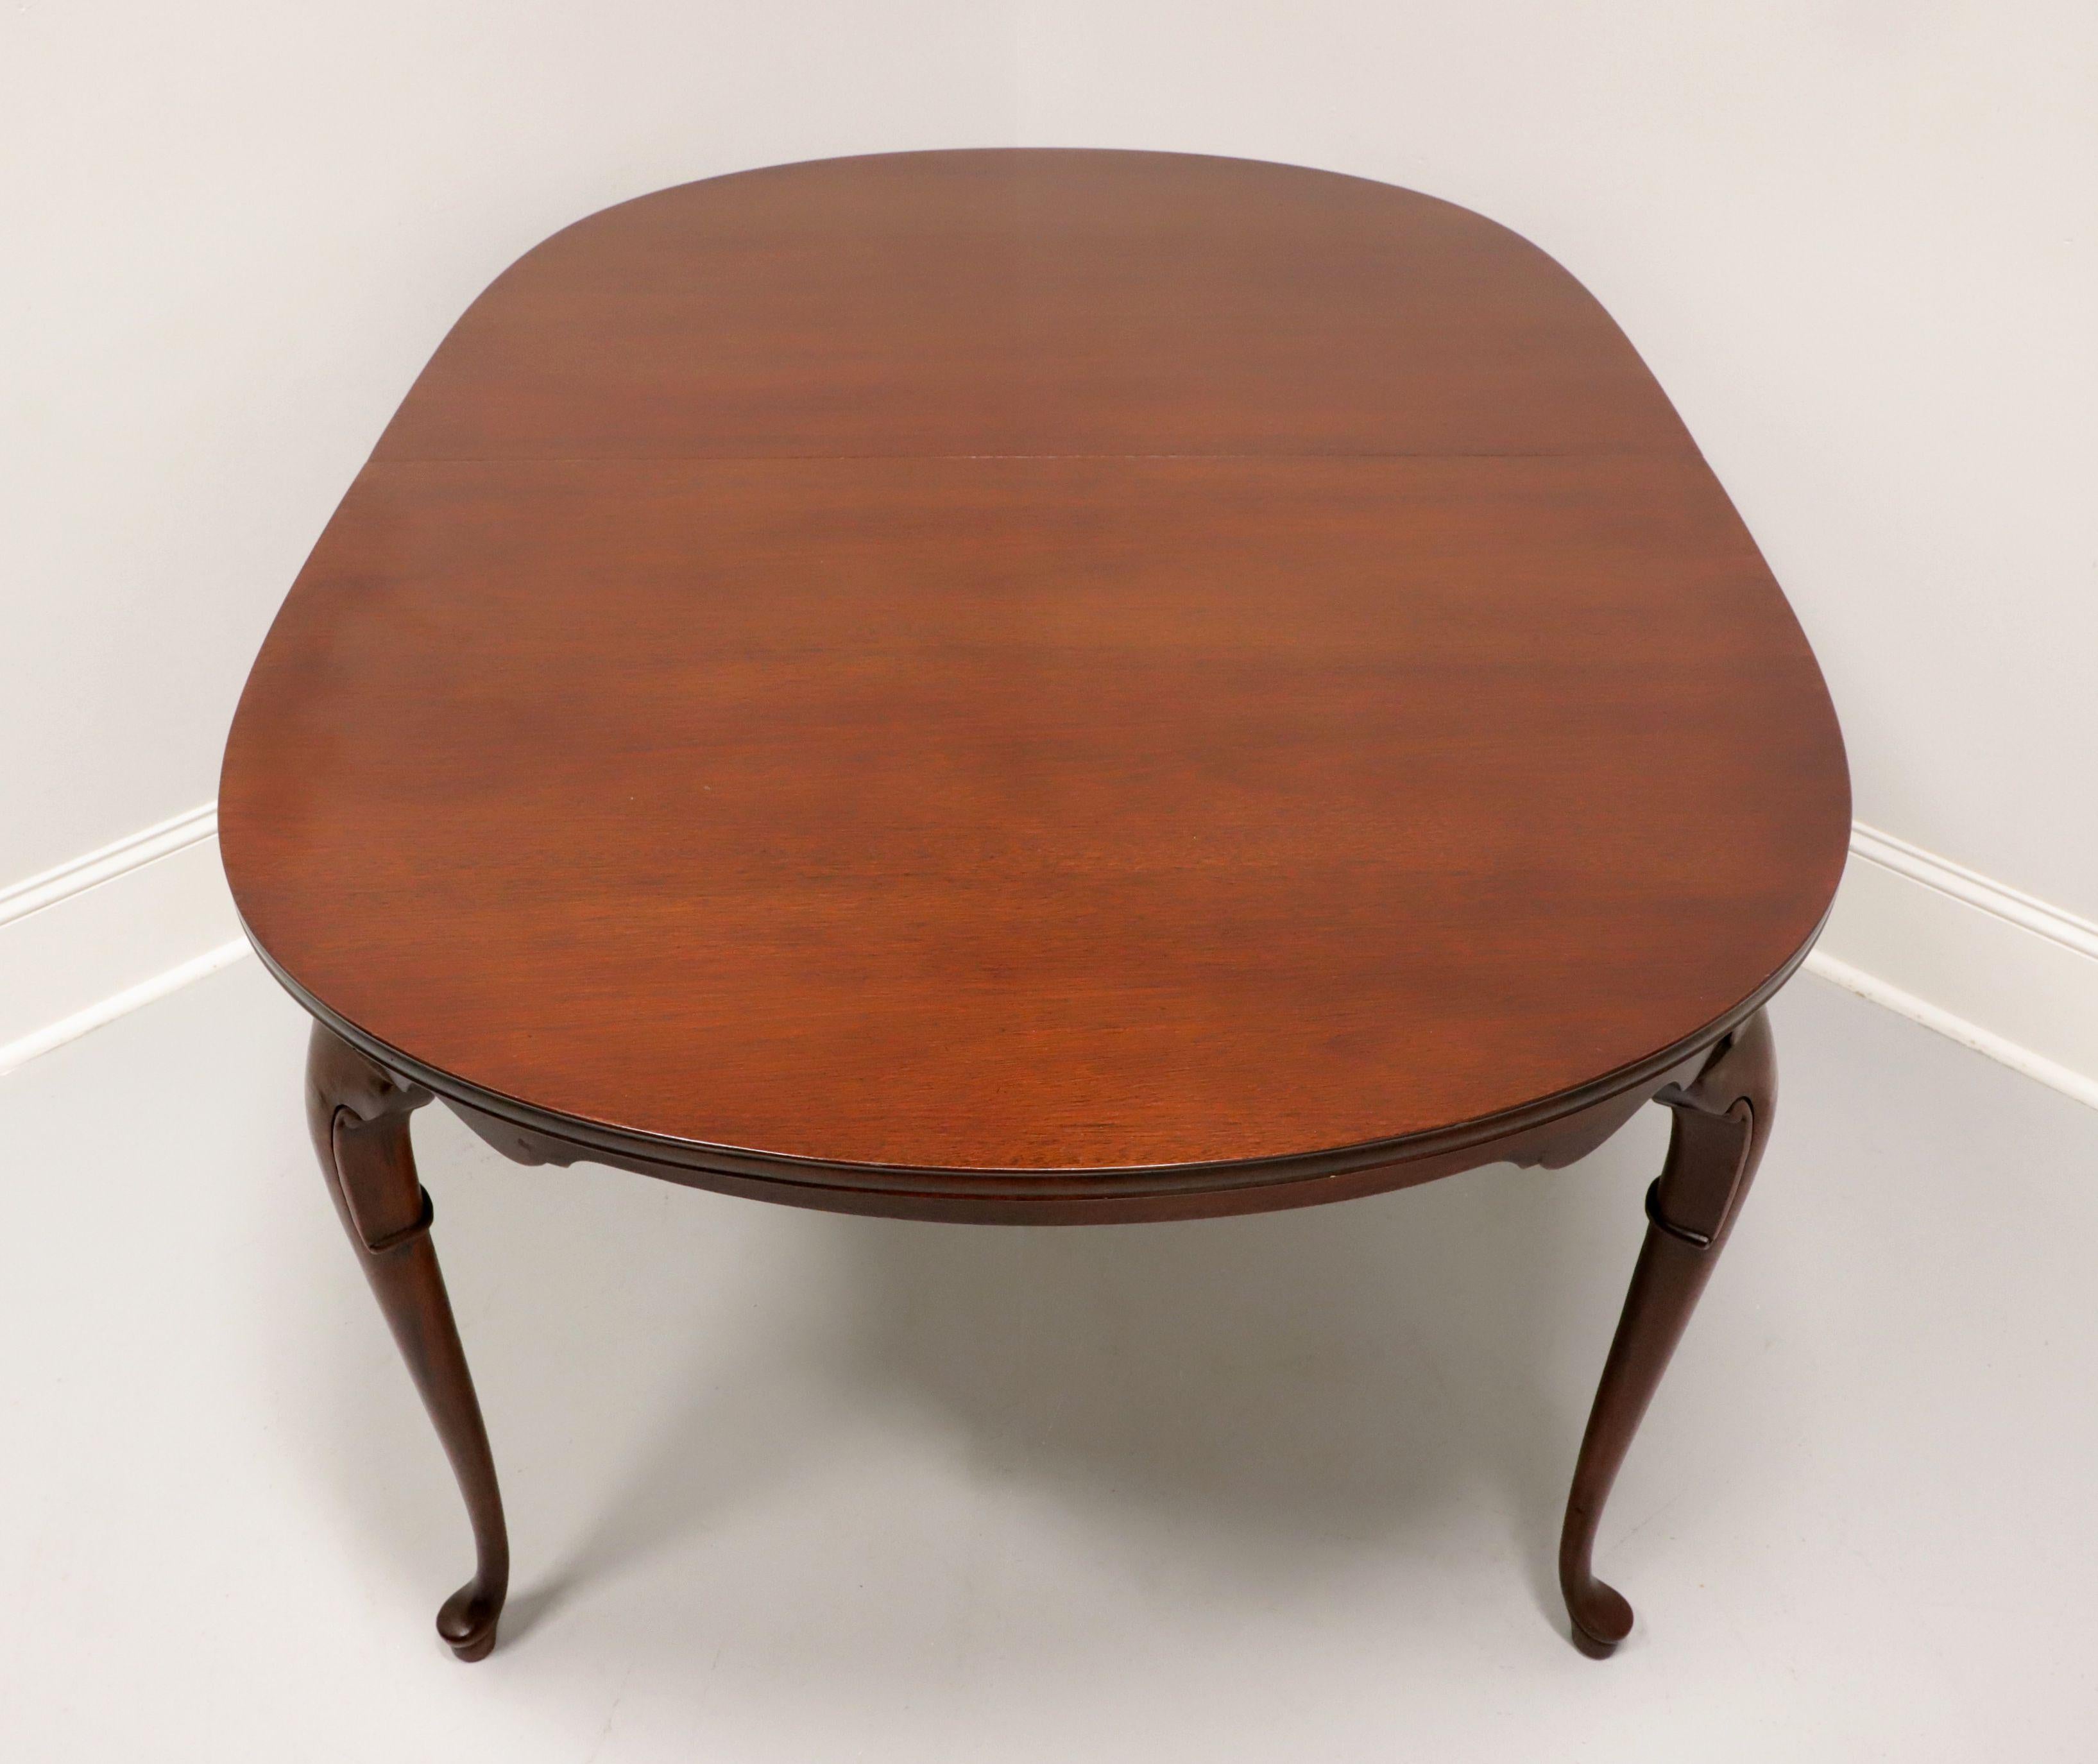 A Queen Anne style oval dining table by high-quality furniture maker Hickory Chair. Mahogany with solid edge to the top, carved apron, decoratively carved knees, cabriole legs and pad feet. Includes two 18 inch extension leaves for placement on